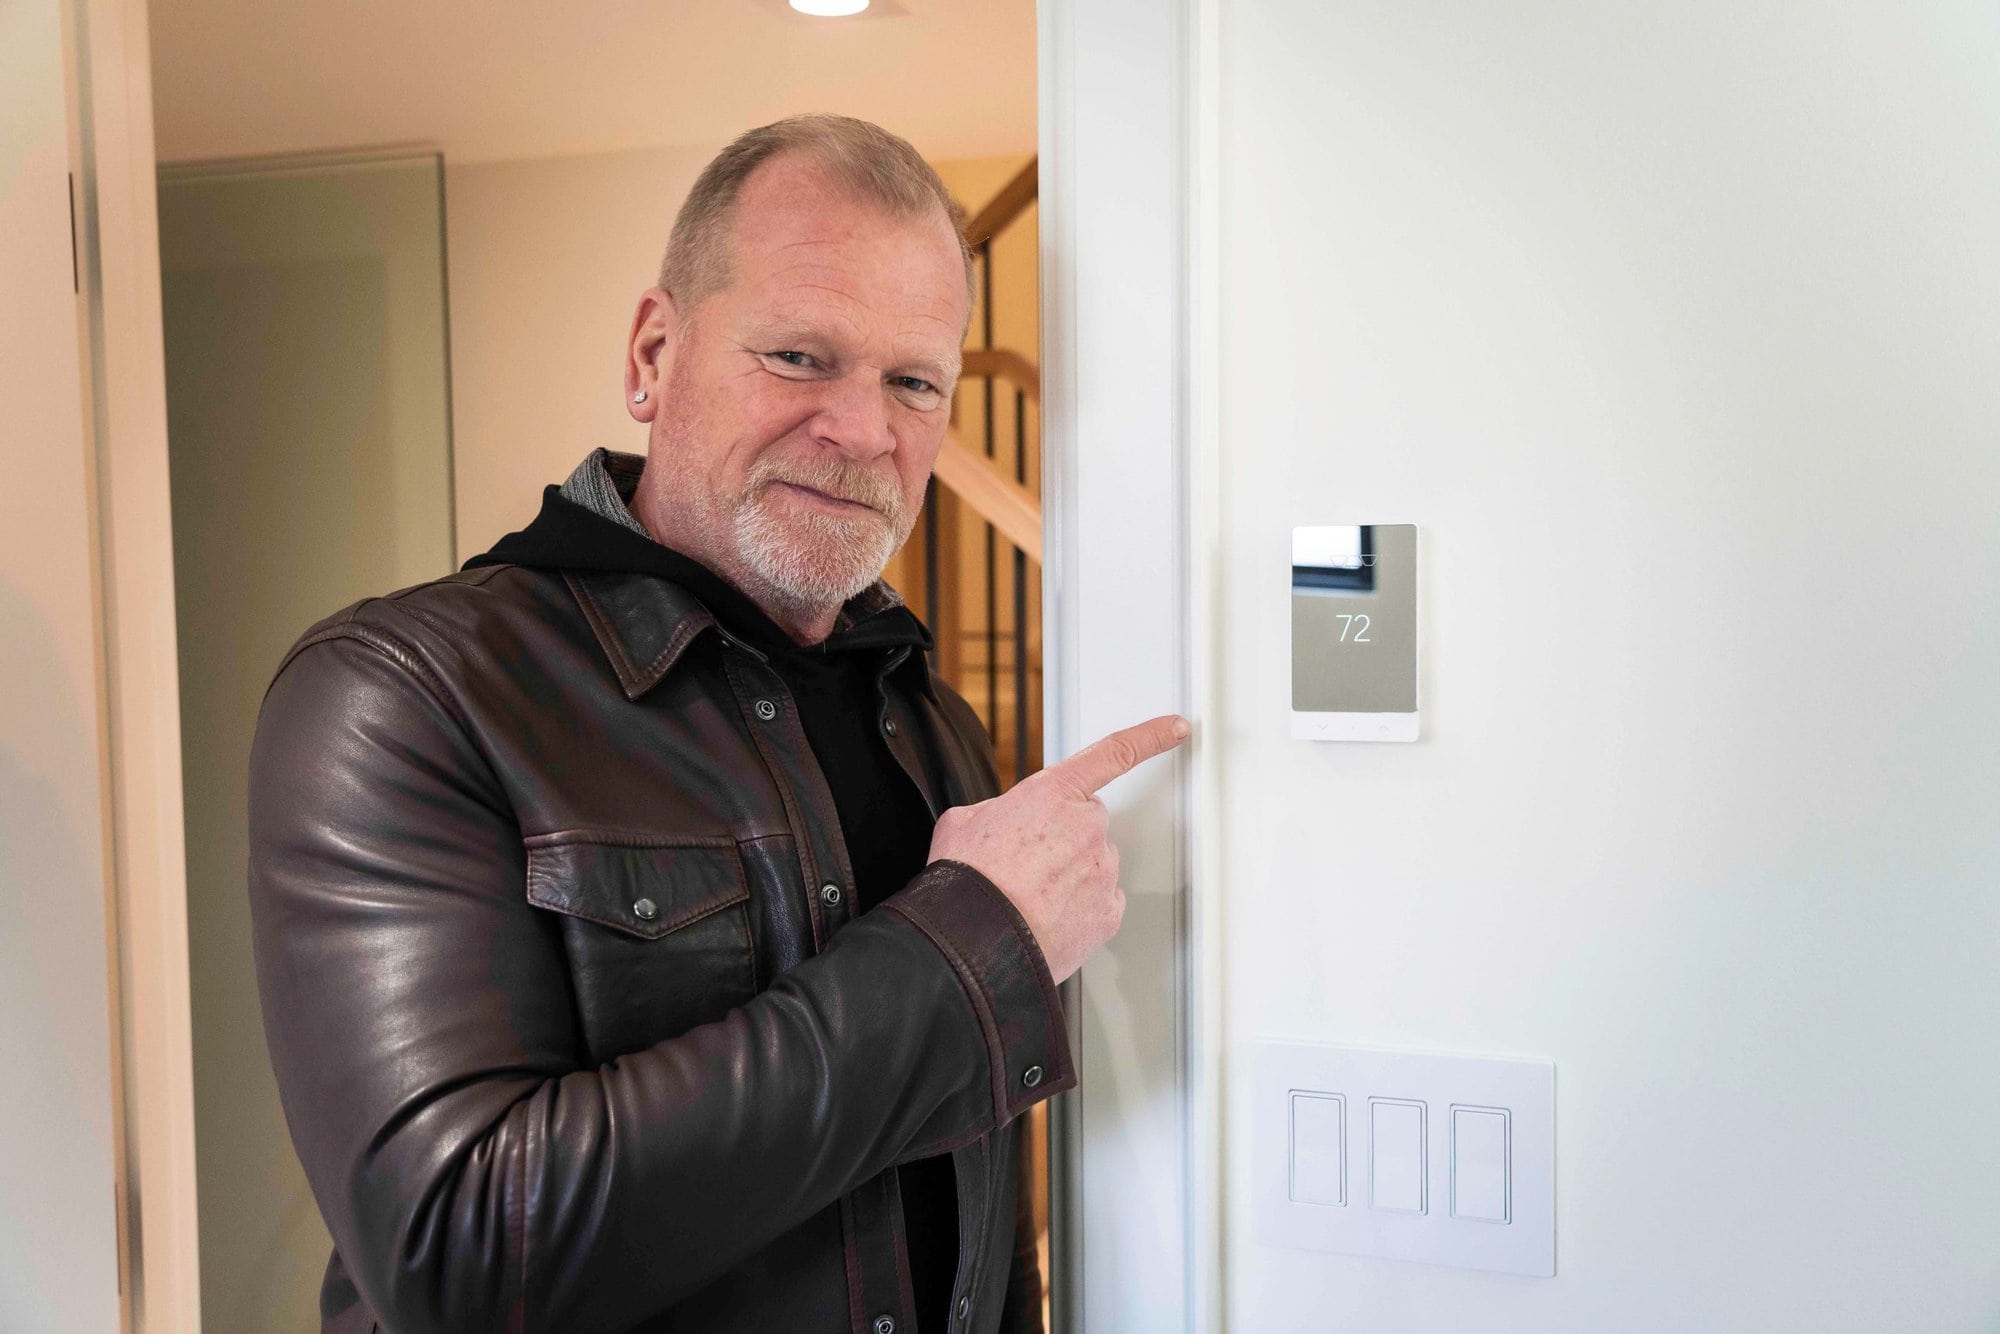 Mike Holmes installed Schluter smart thermostat on project.